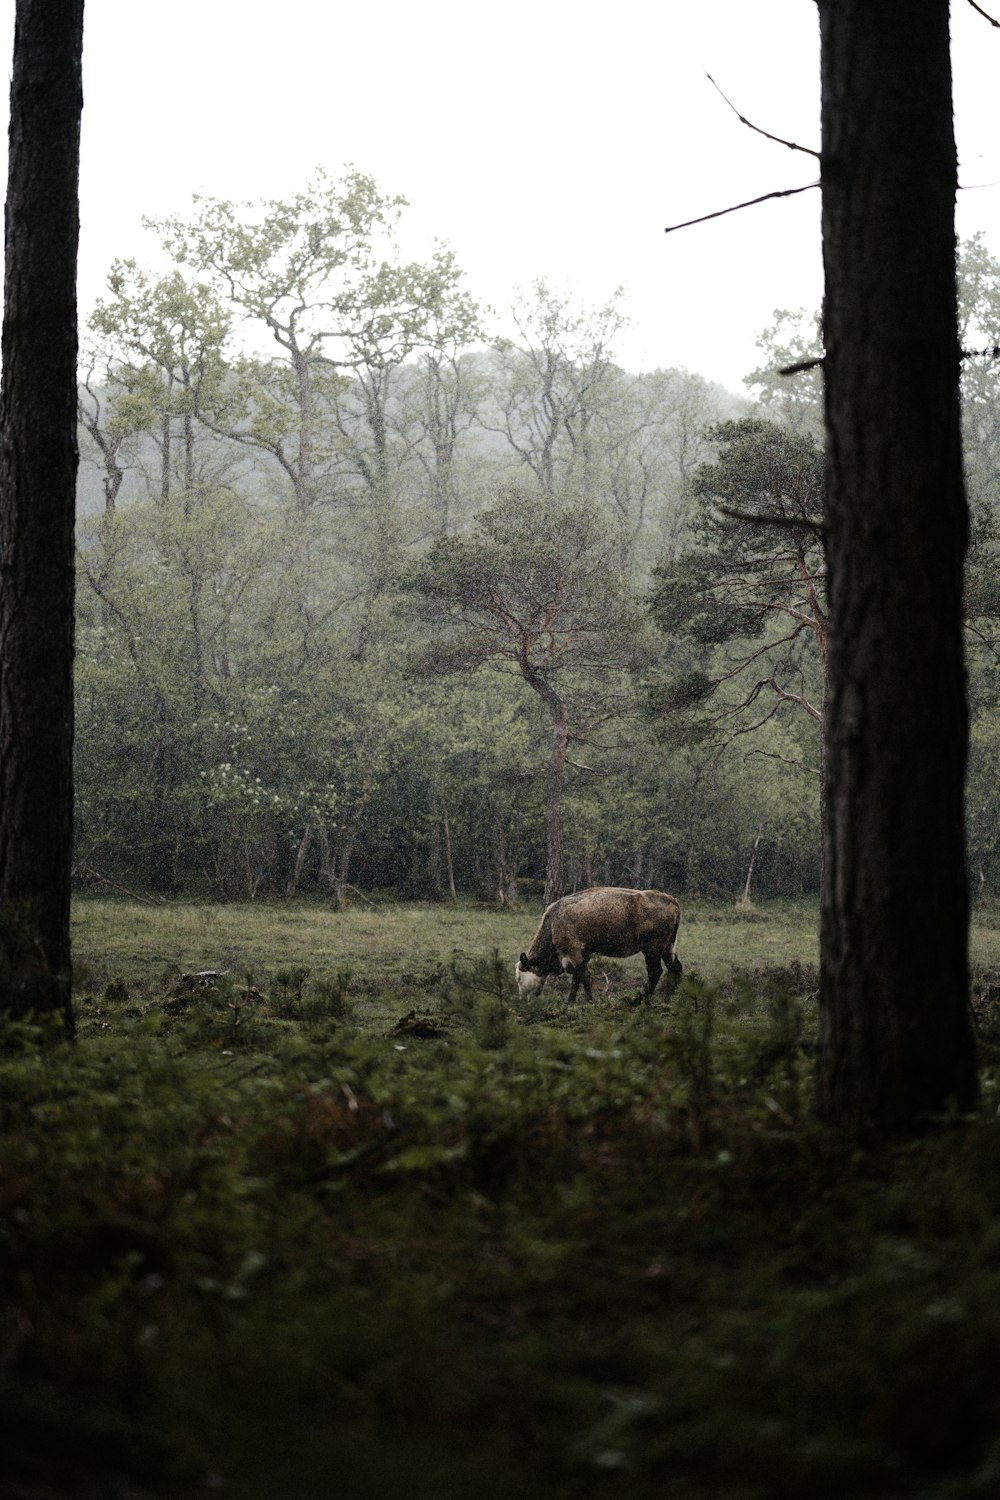 a rhino grazes in a field surrounded by trees